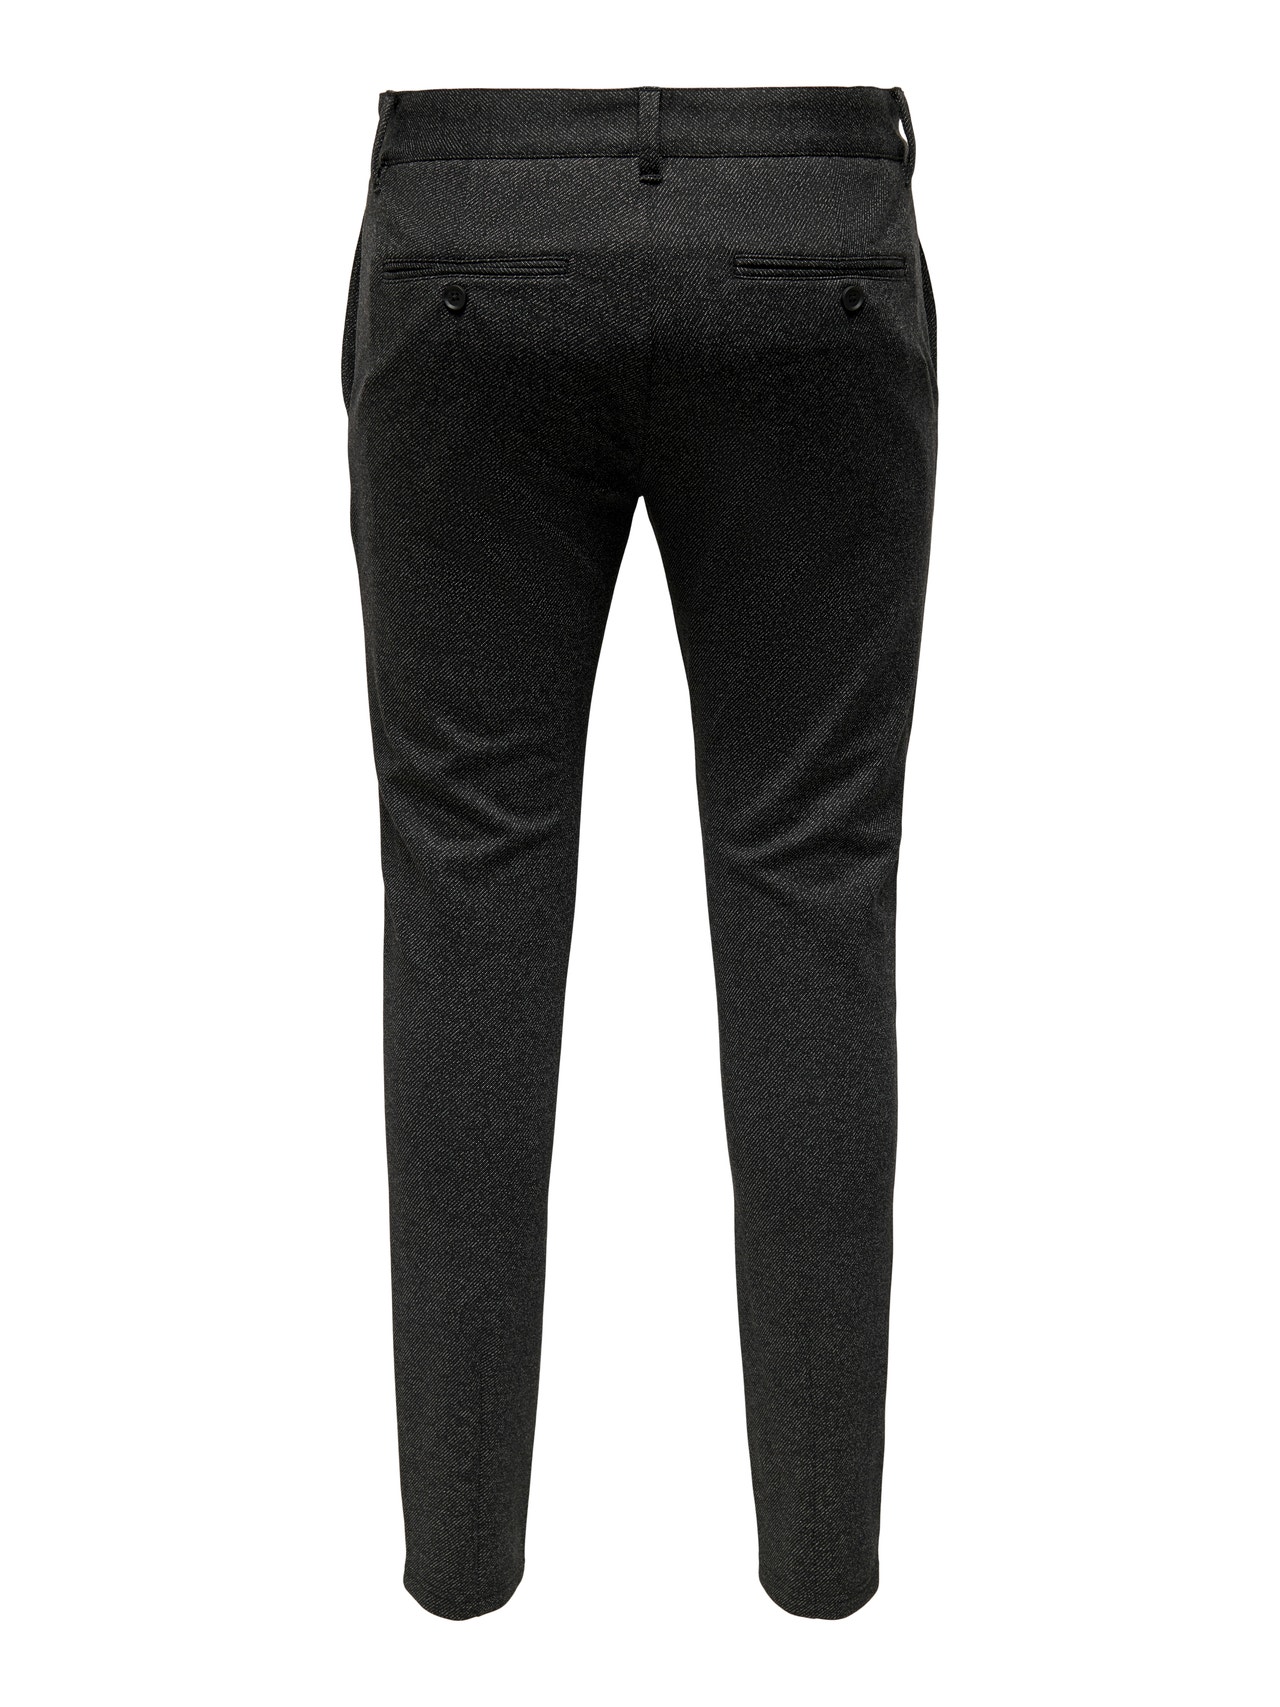 ONLY & SONS Elasticated pants -Black - 22023496